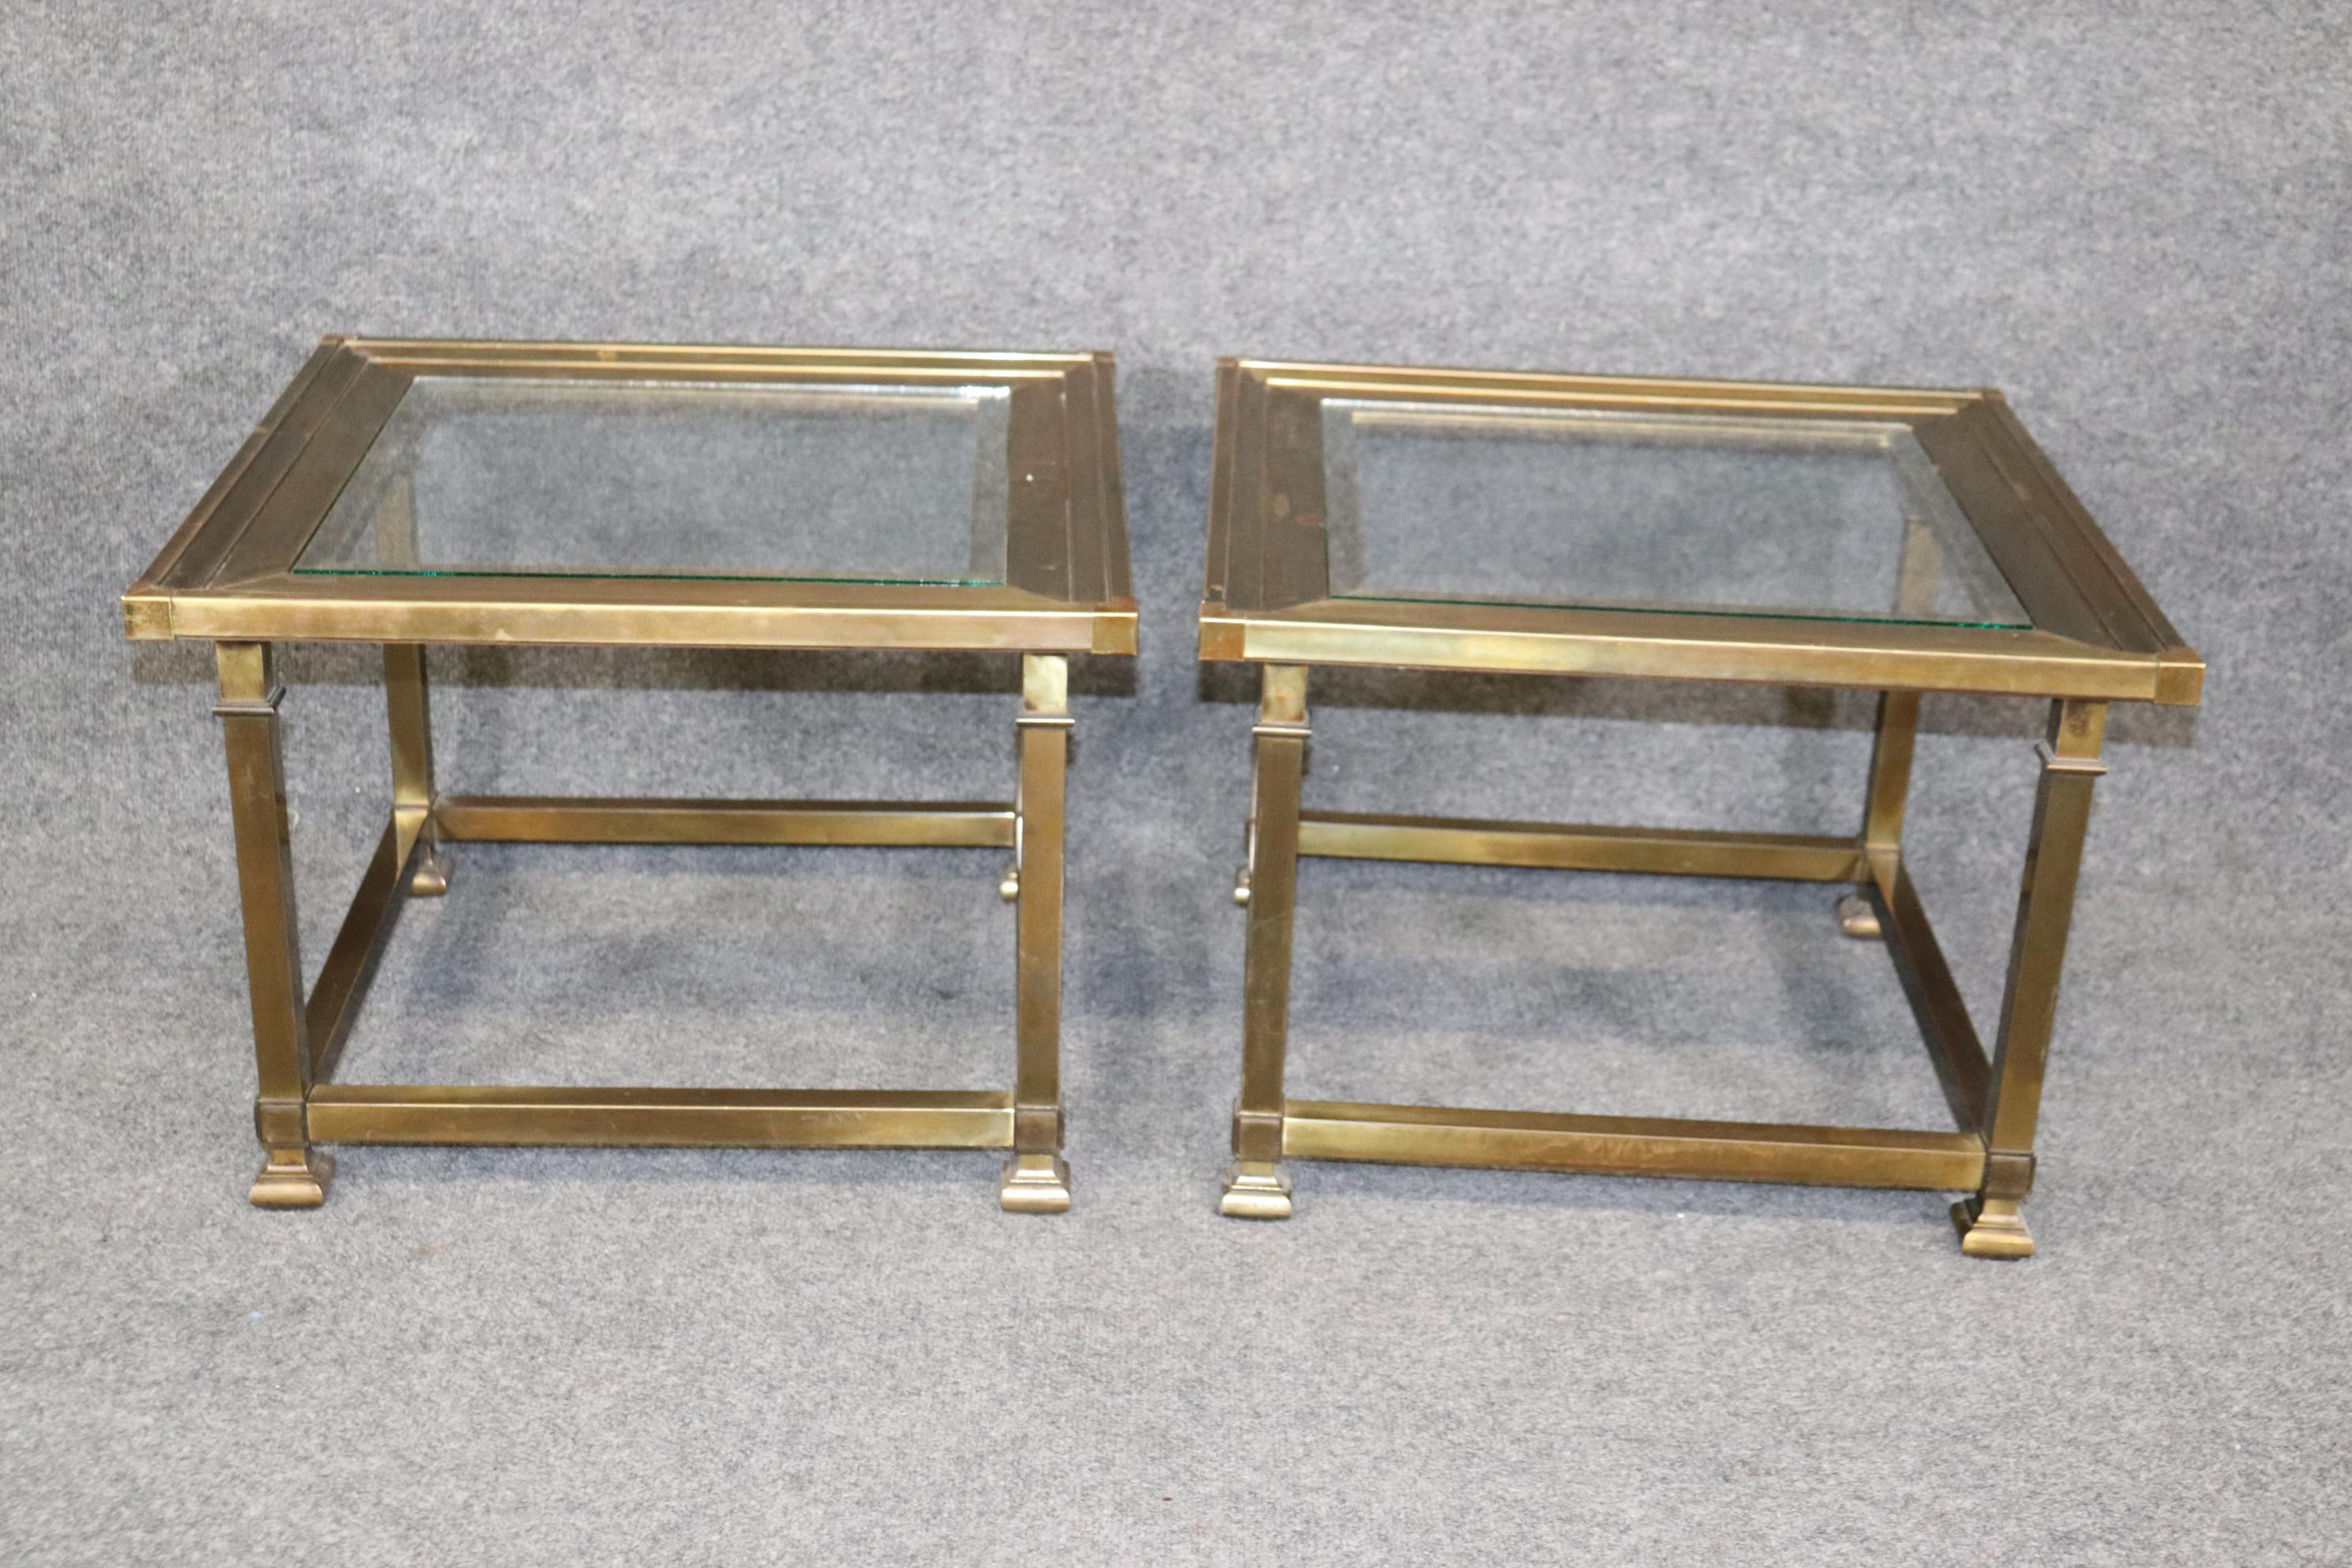 Dimensions- H: 16in W: 22in D: 22in 
This Pair of Square Brass And Glass Top Mastercraft End Tables are made of the highest quality and are perfect for you and your home! If you take a look at the photos provided you will see the aged and tarnished